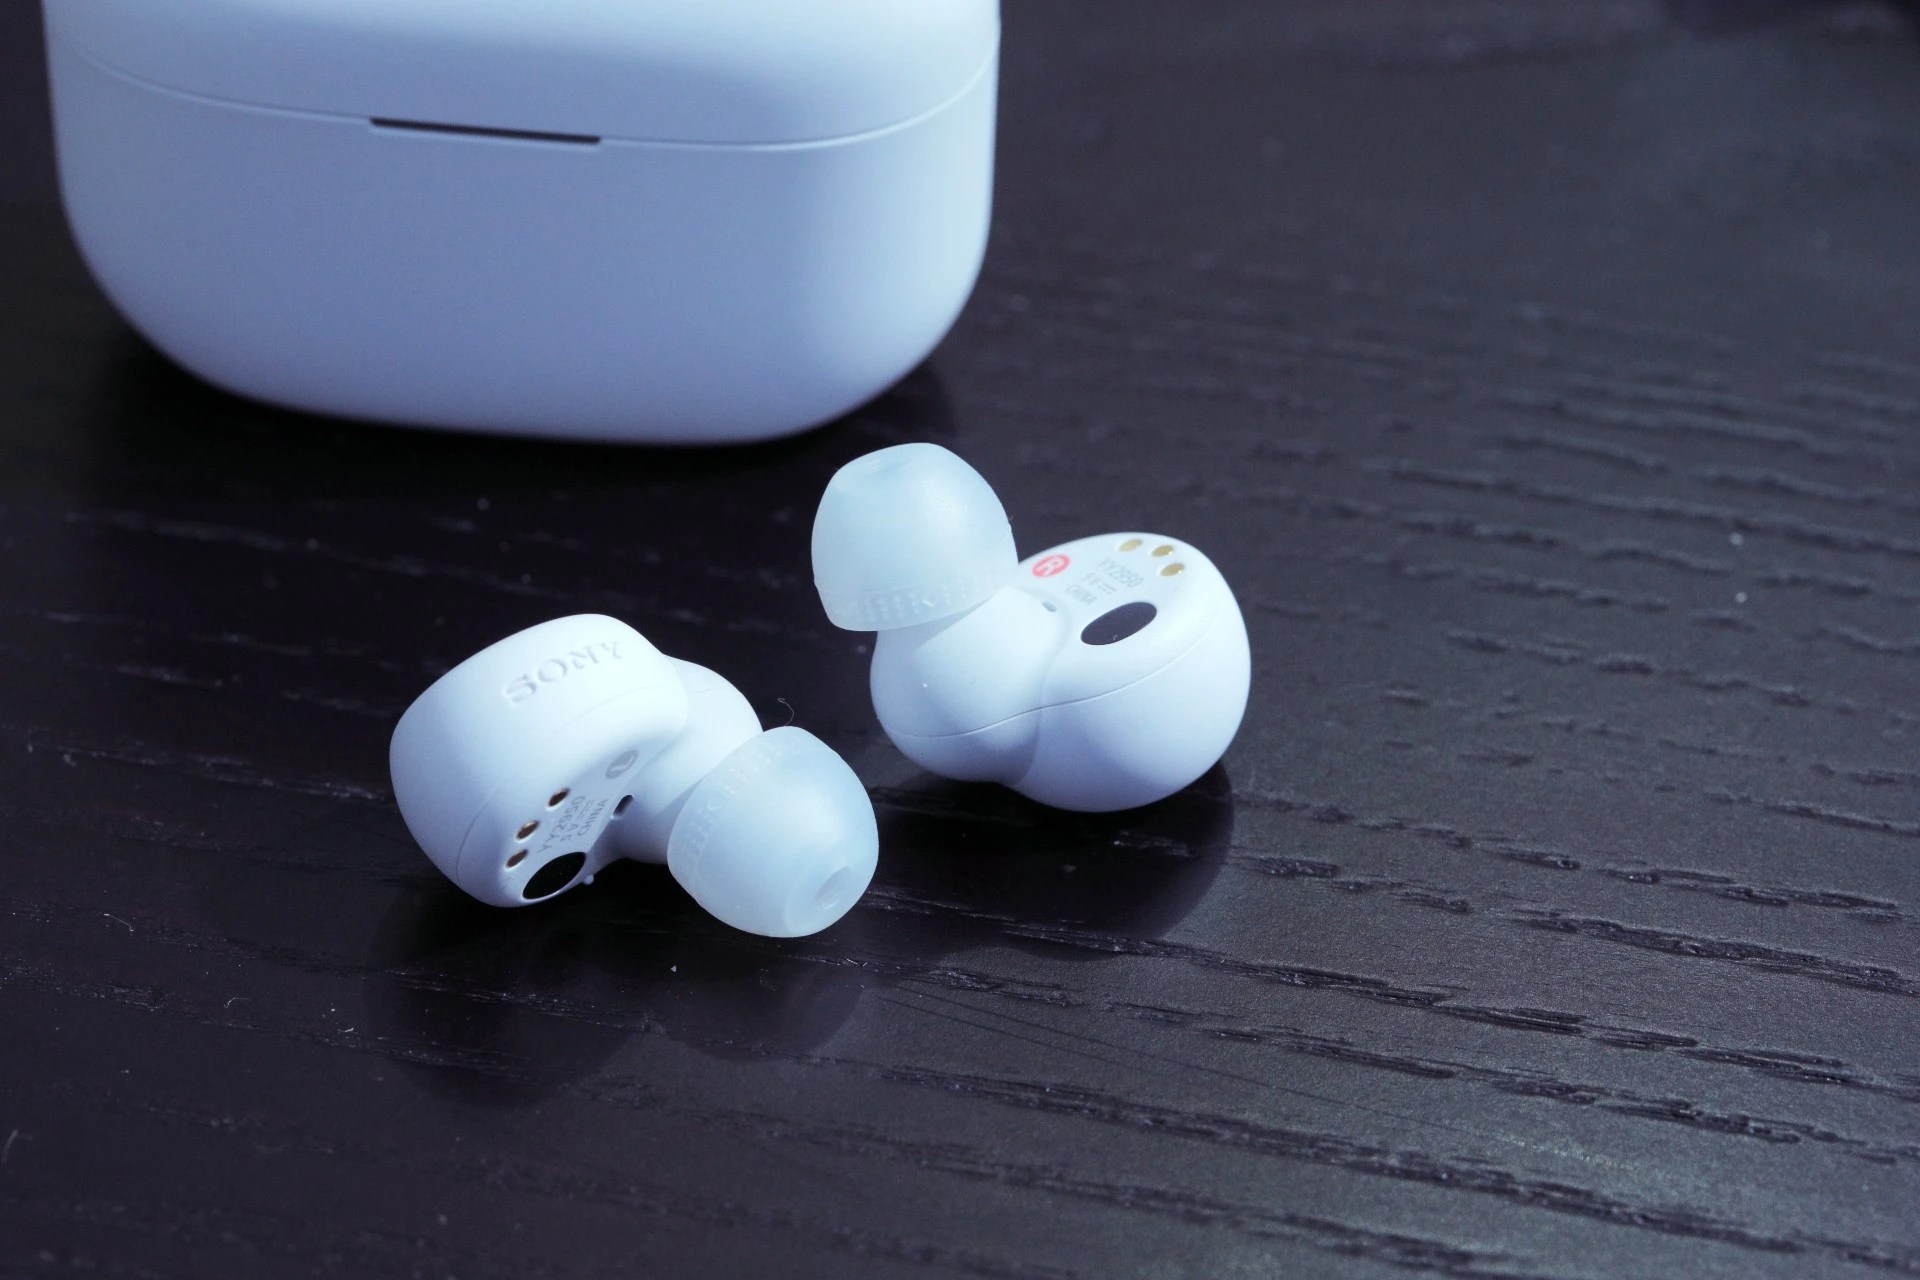 Sony earbuds image, gift idea